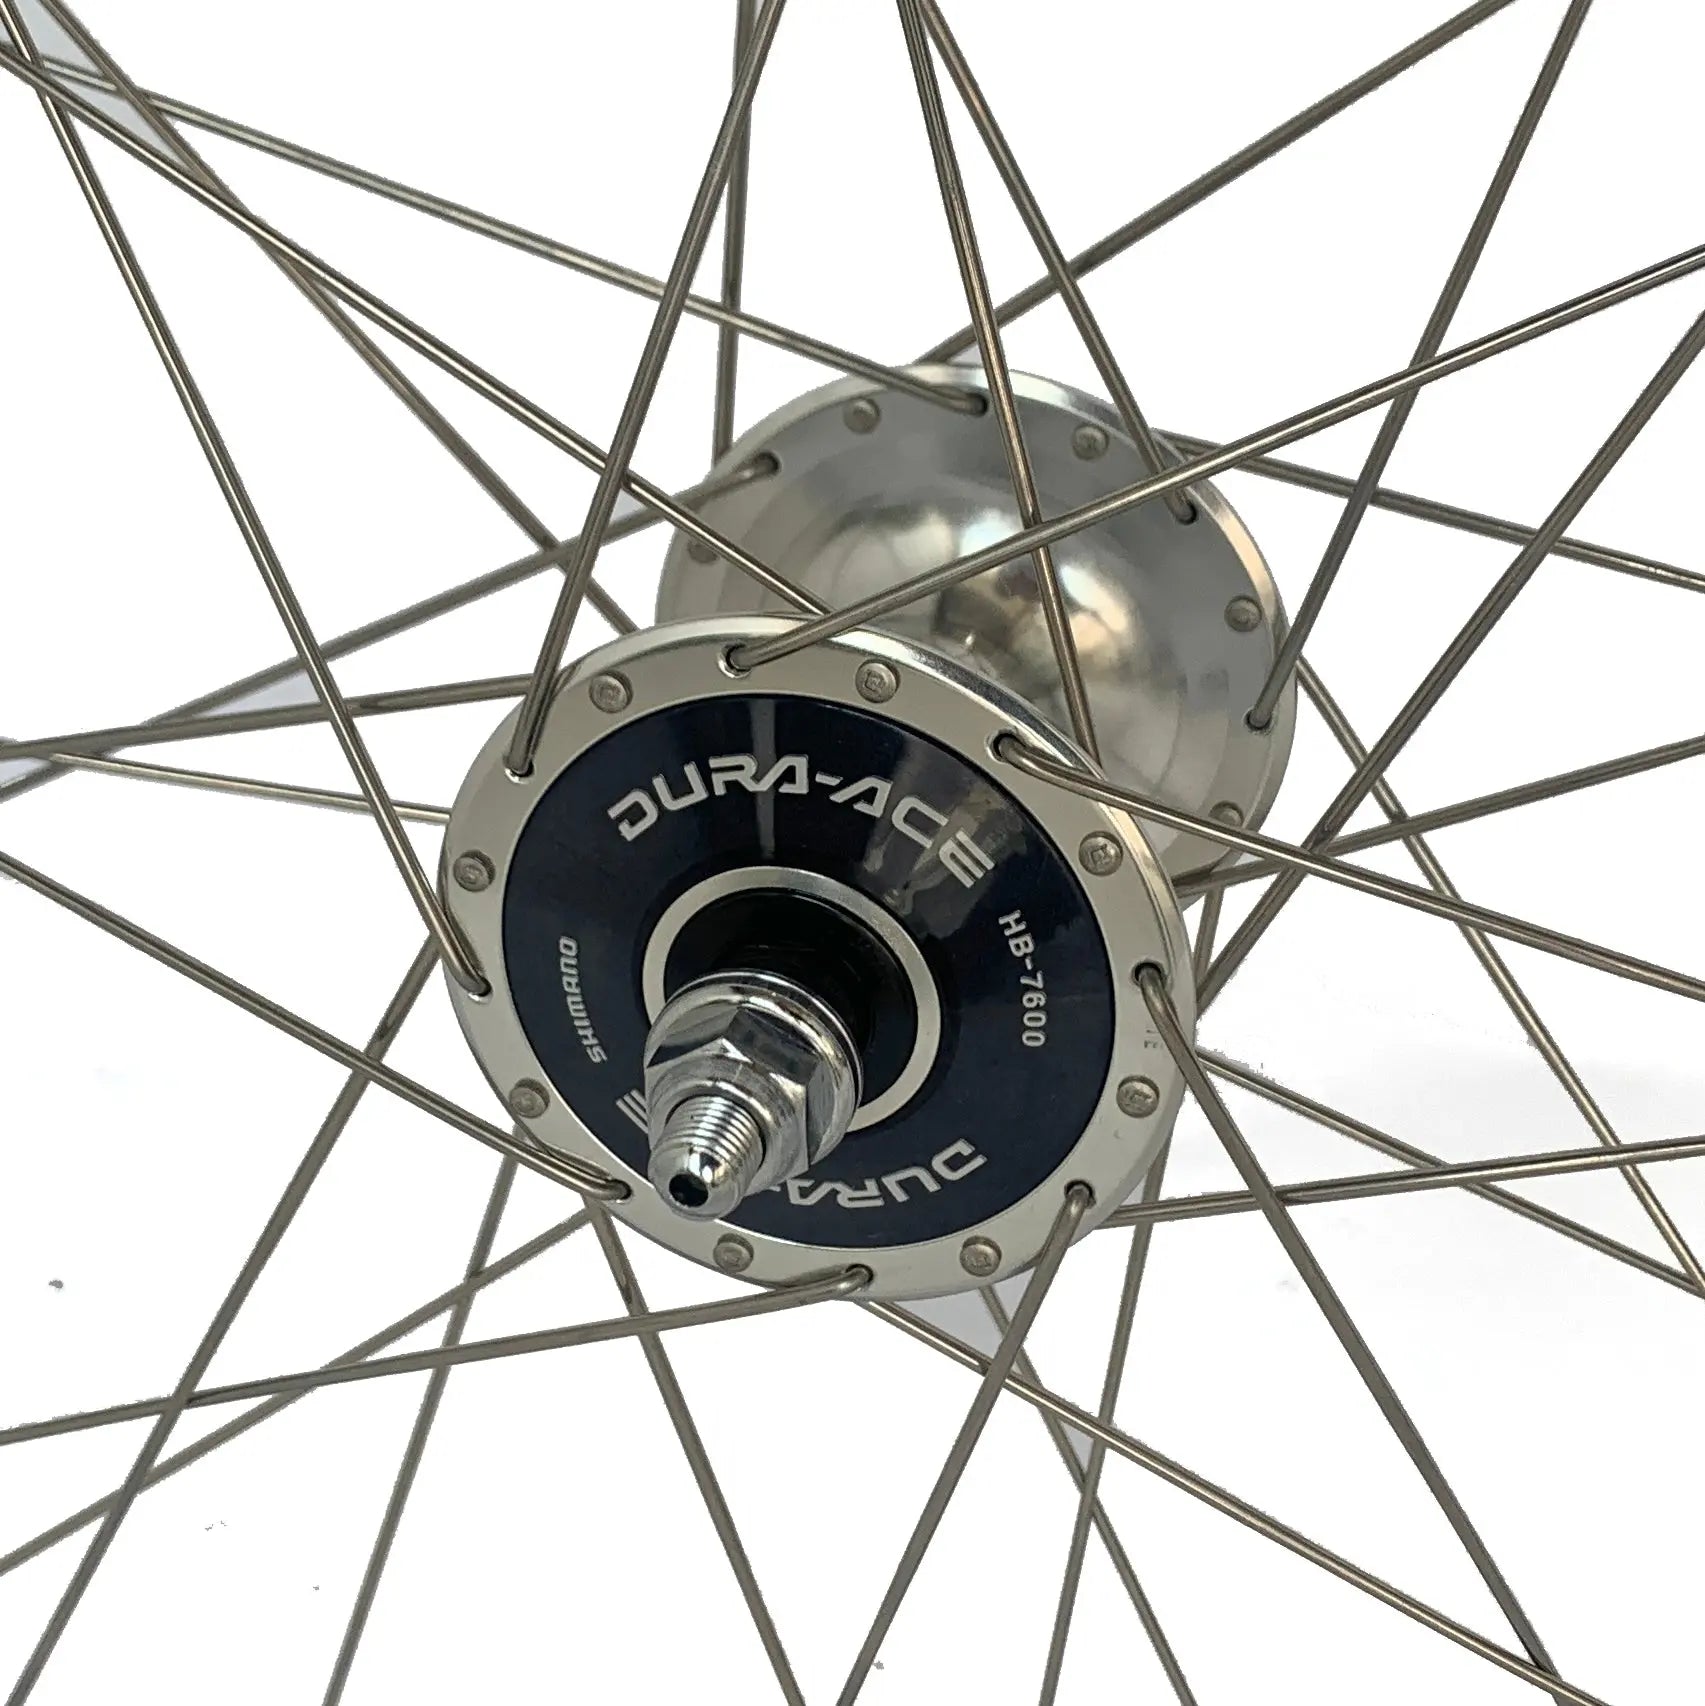 Dura Ace 7600 / H+Son TB-14 700C 32H/32H Fixed/Fixed Wheelset-Wabi Cycles